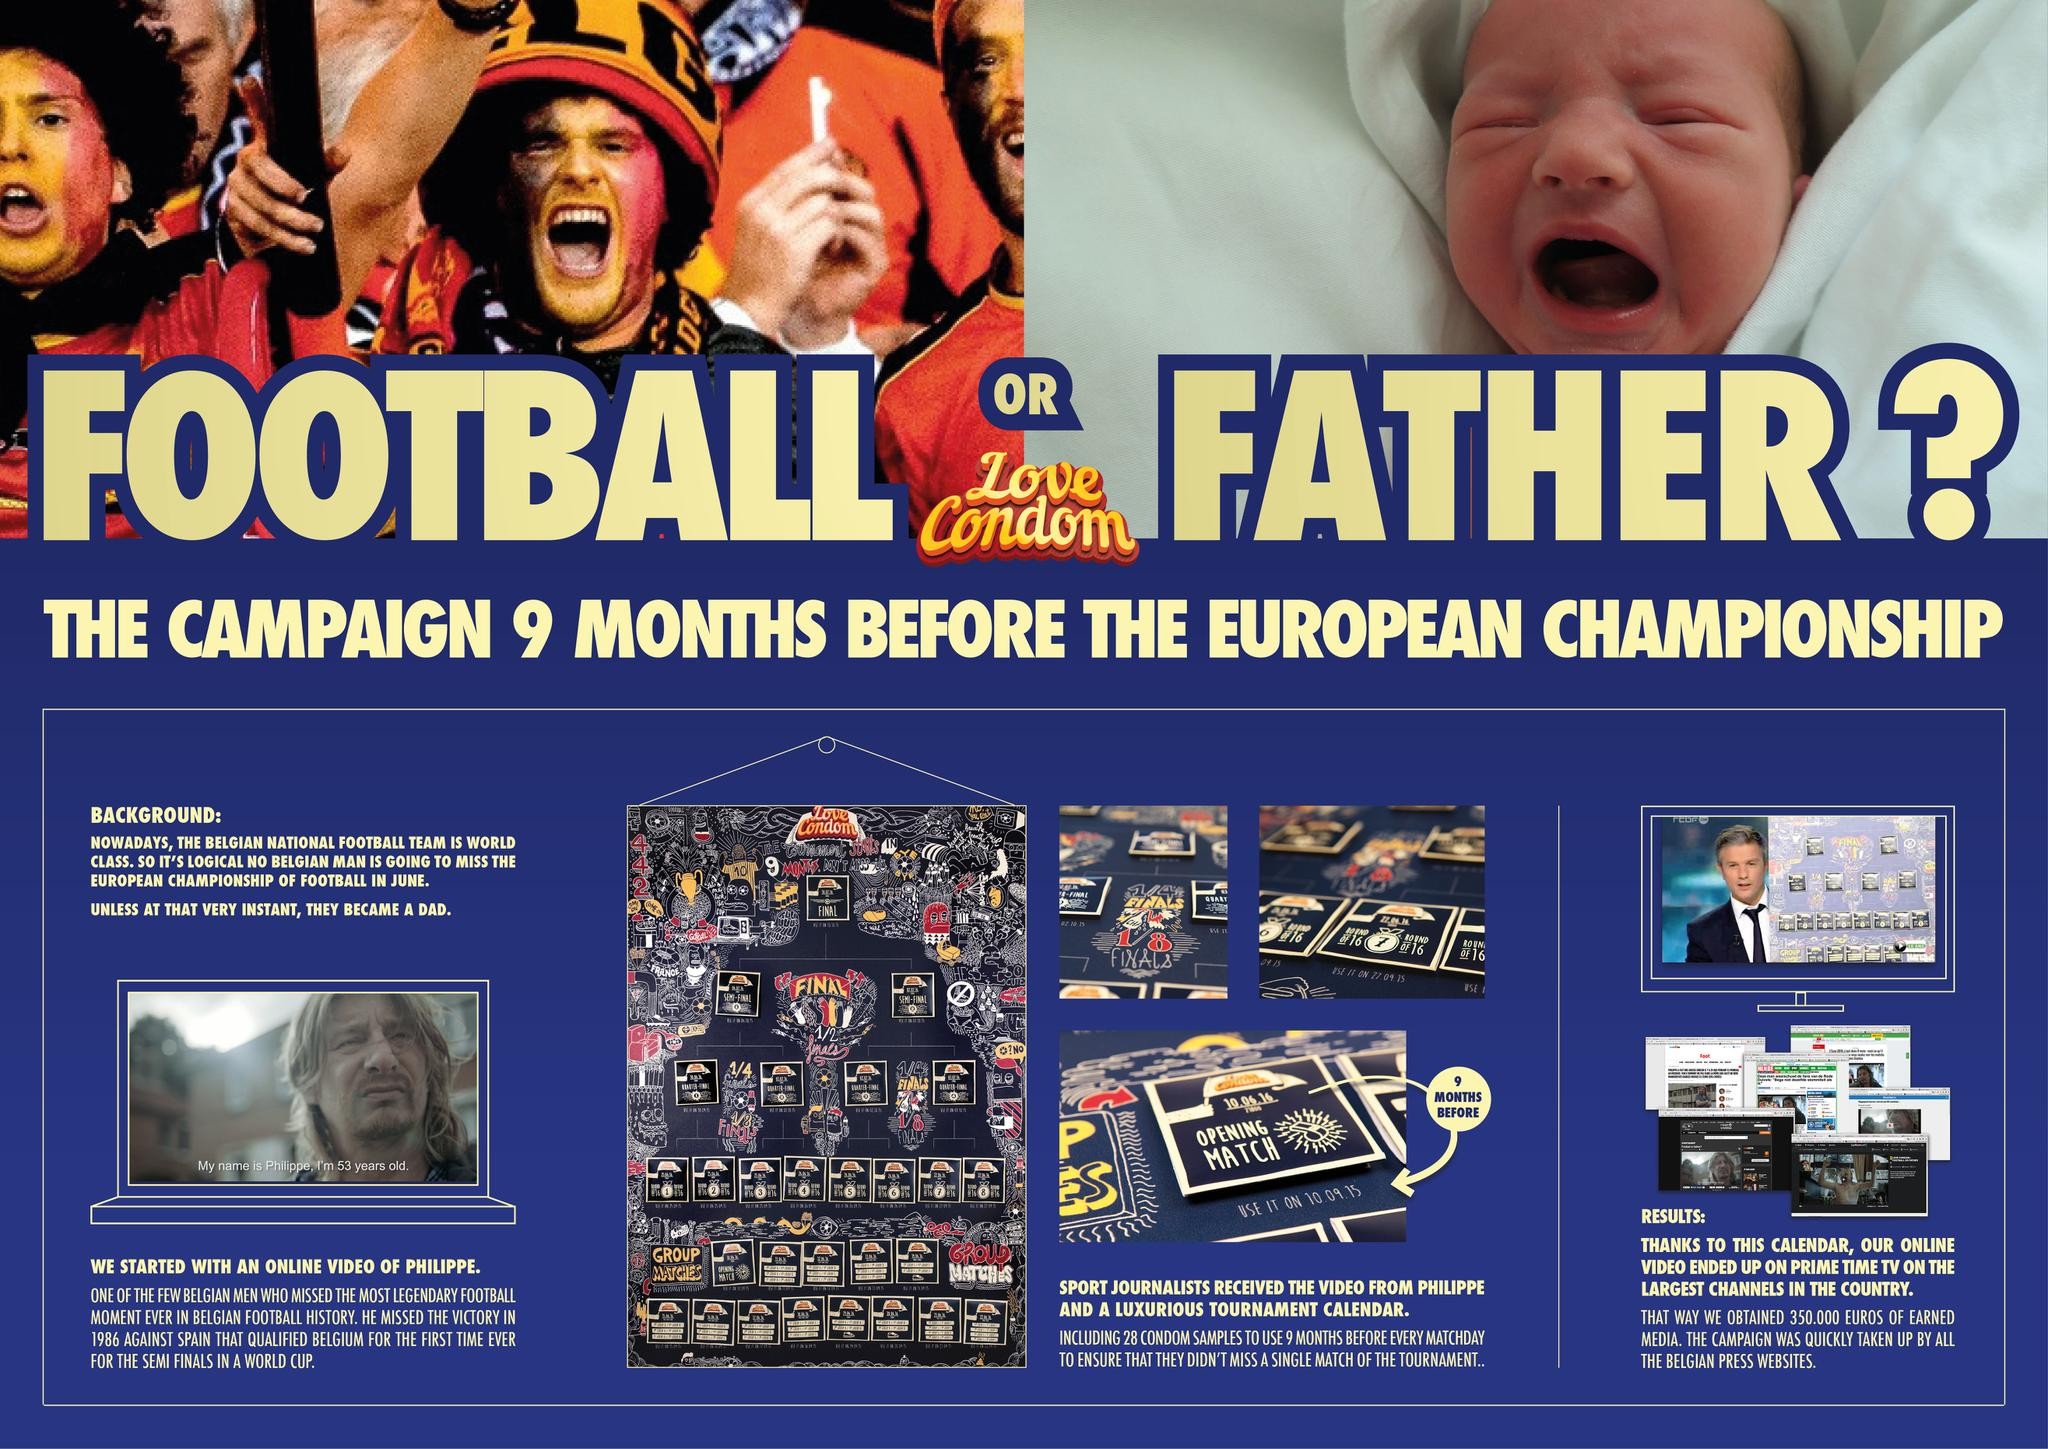 FOOTBALL OR FATHER